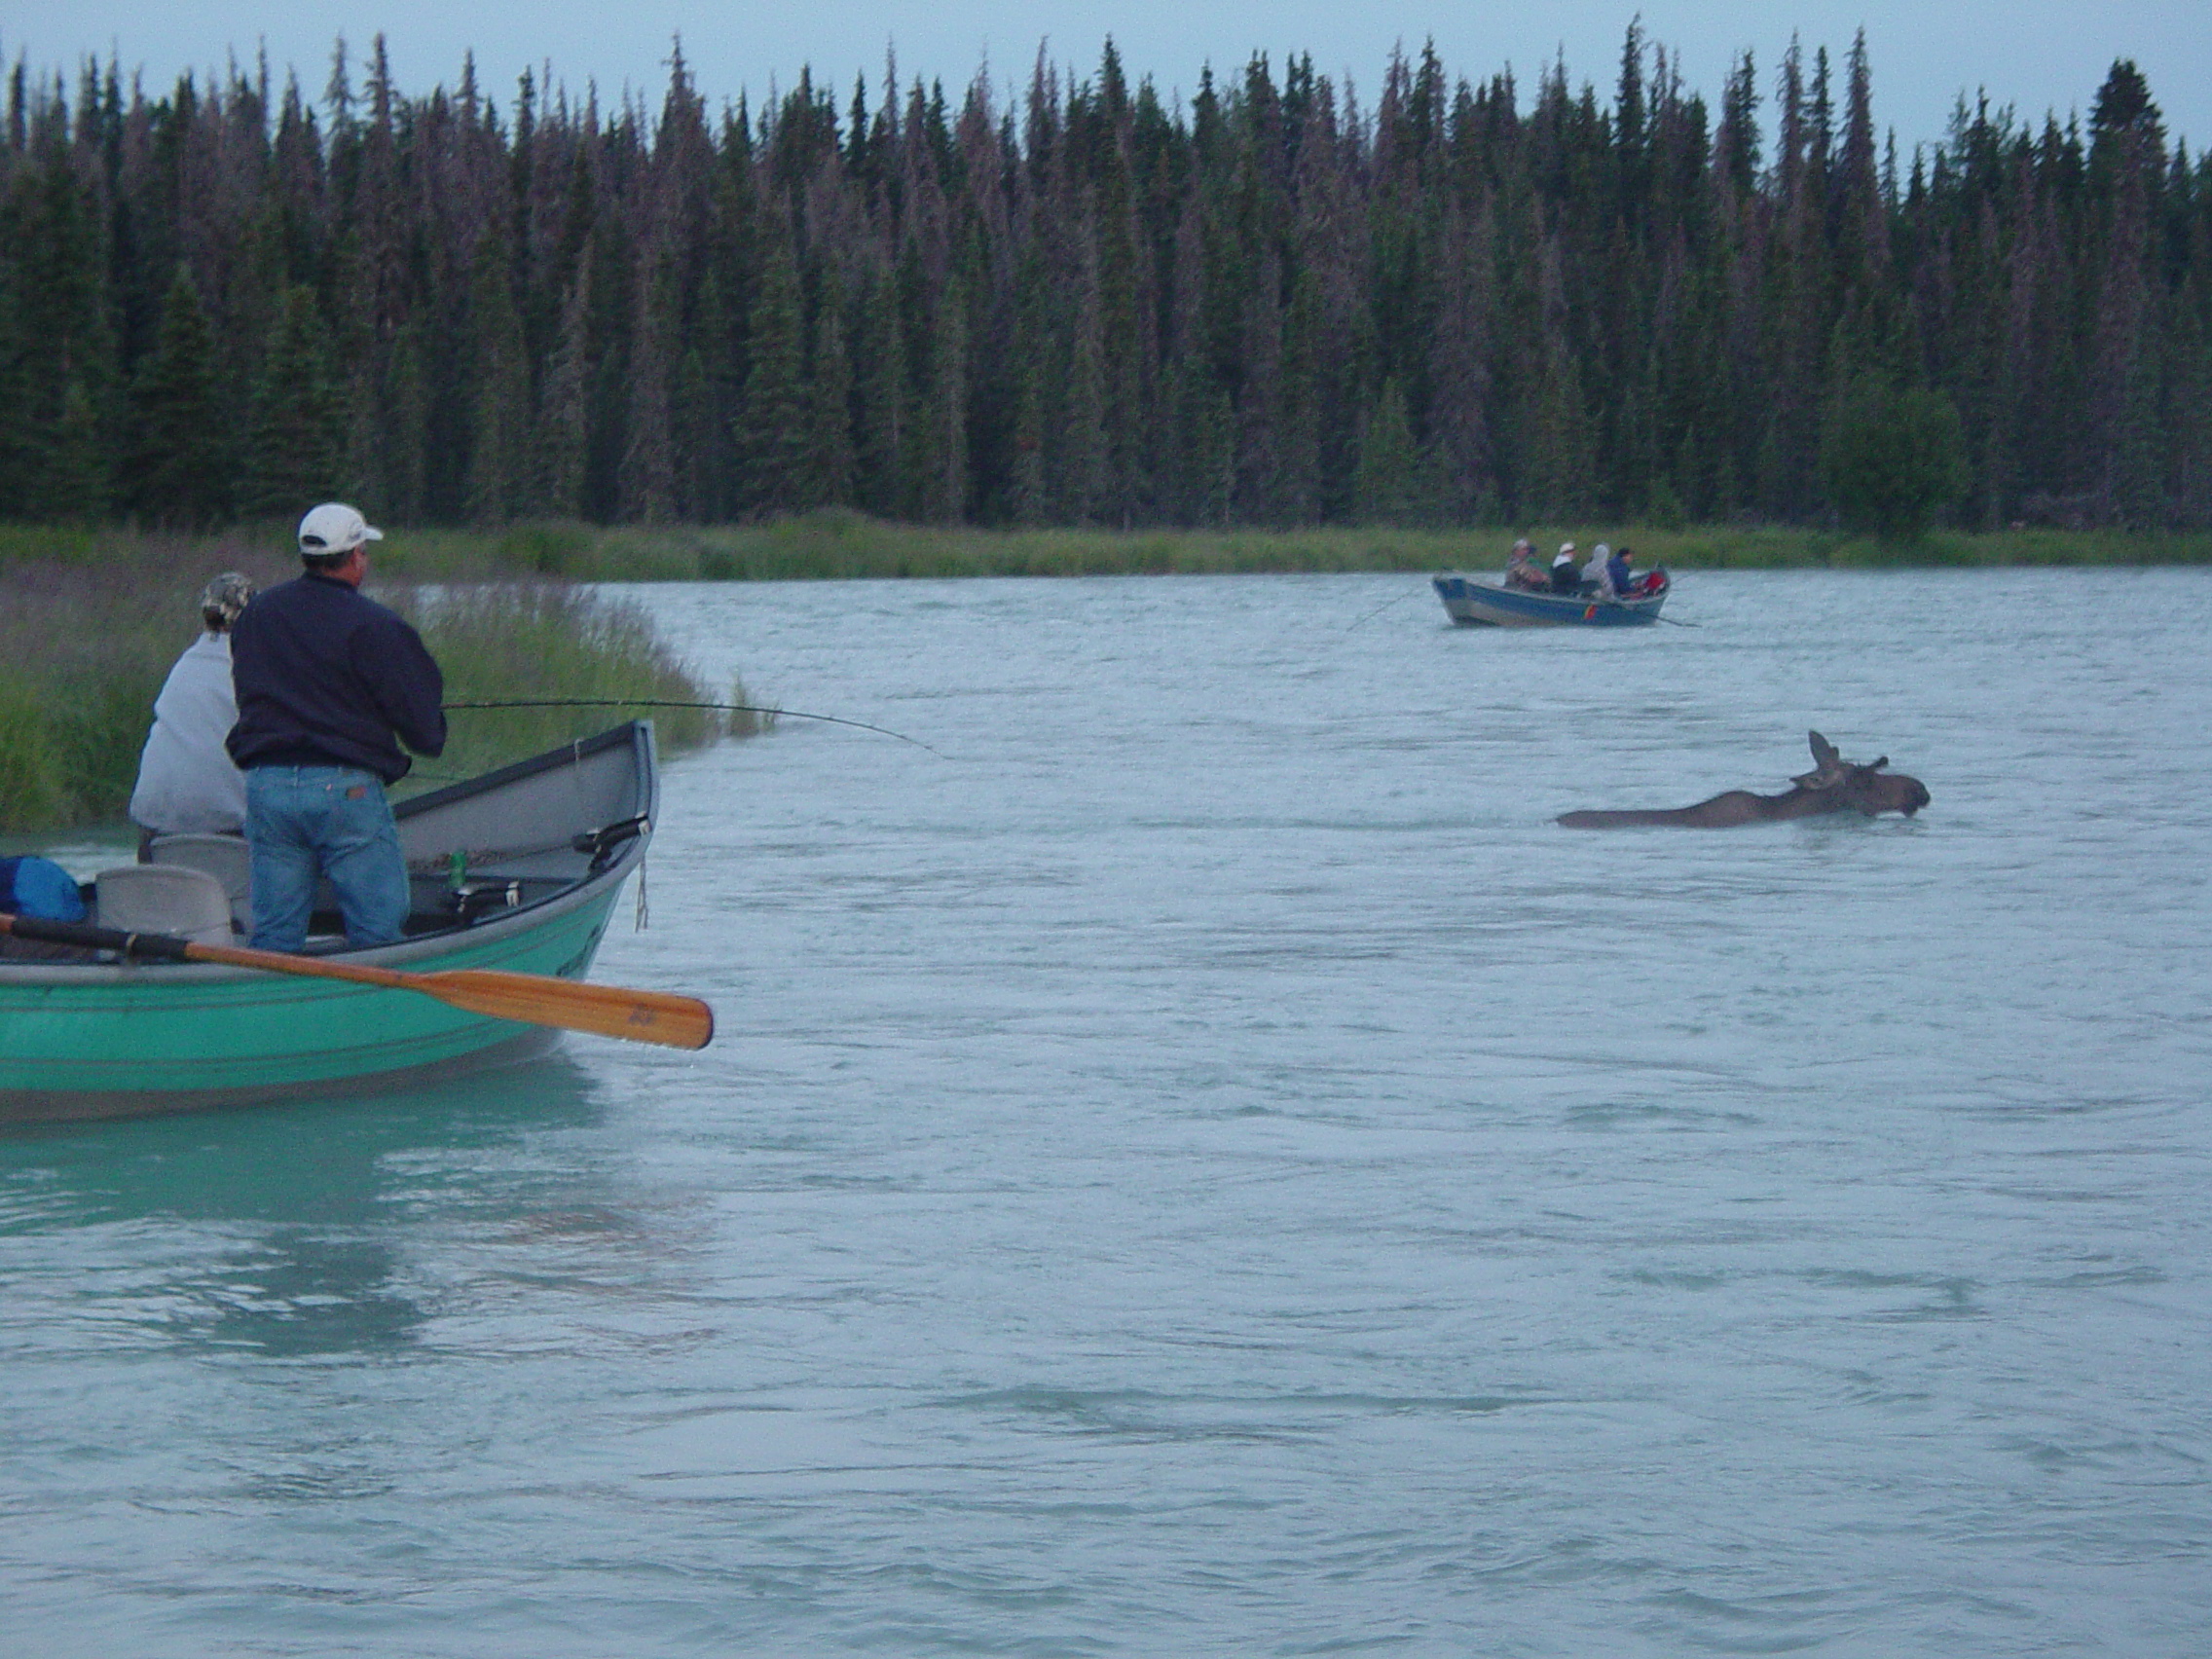 Sometimes you have to reel in ... to let the moose swim by!